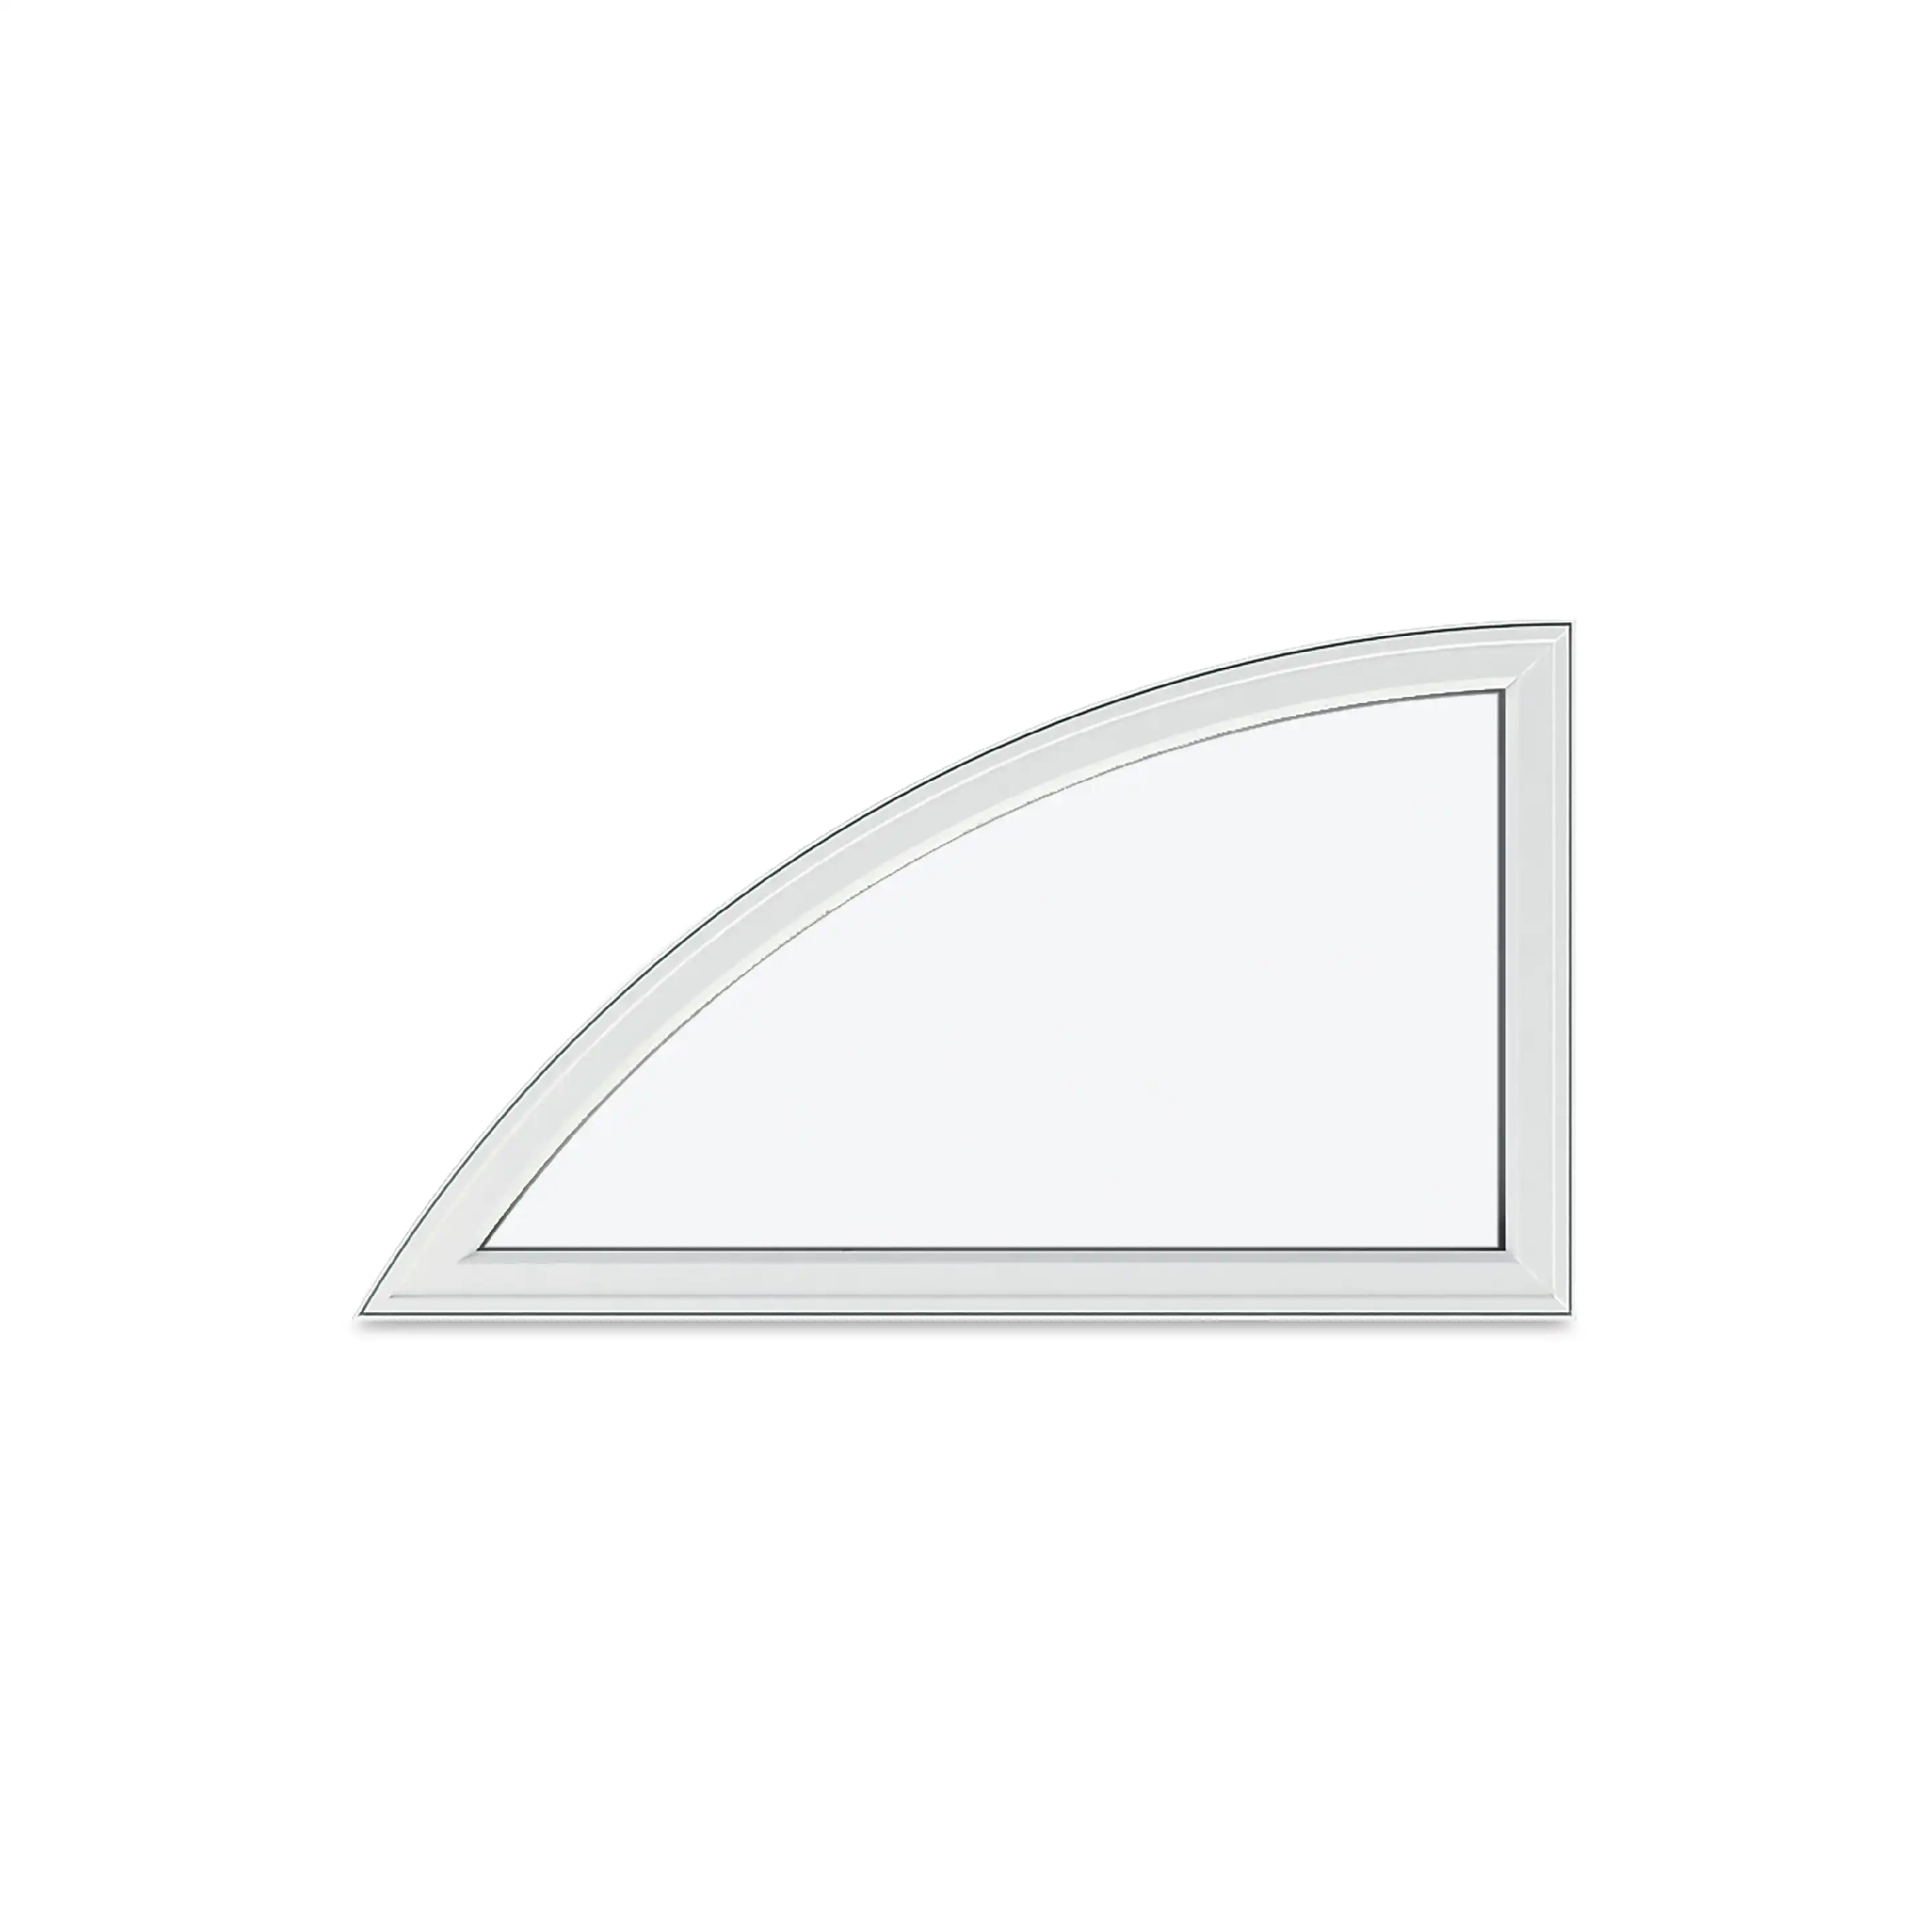 Image of a white Marvin Replacement arch window in a horizontal quarter eyebrow style.